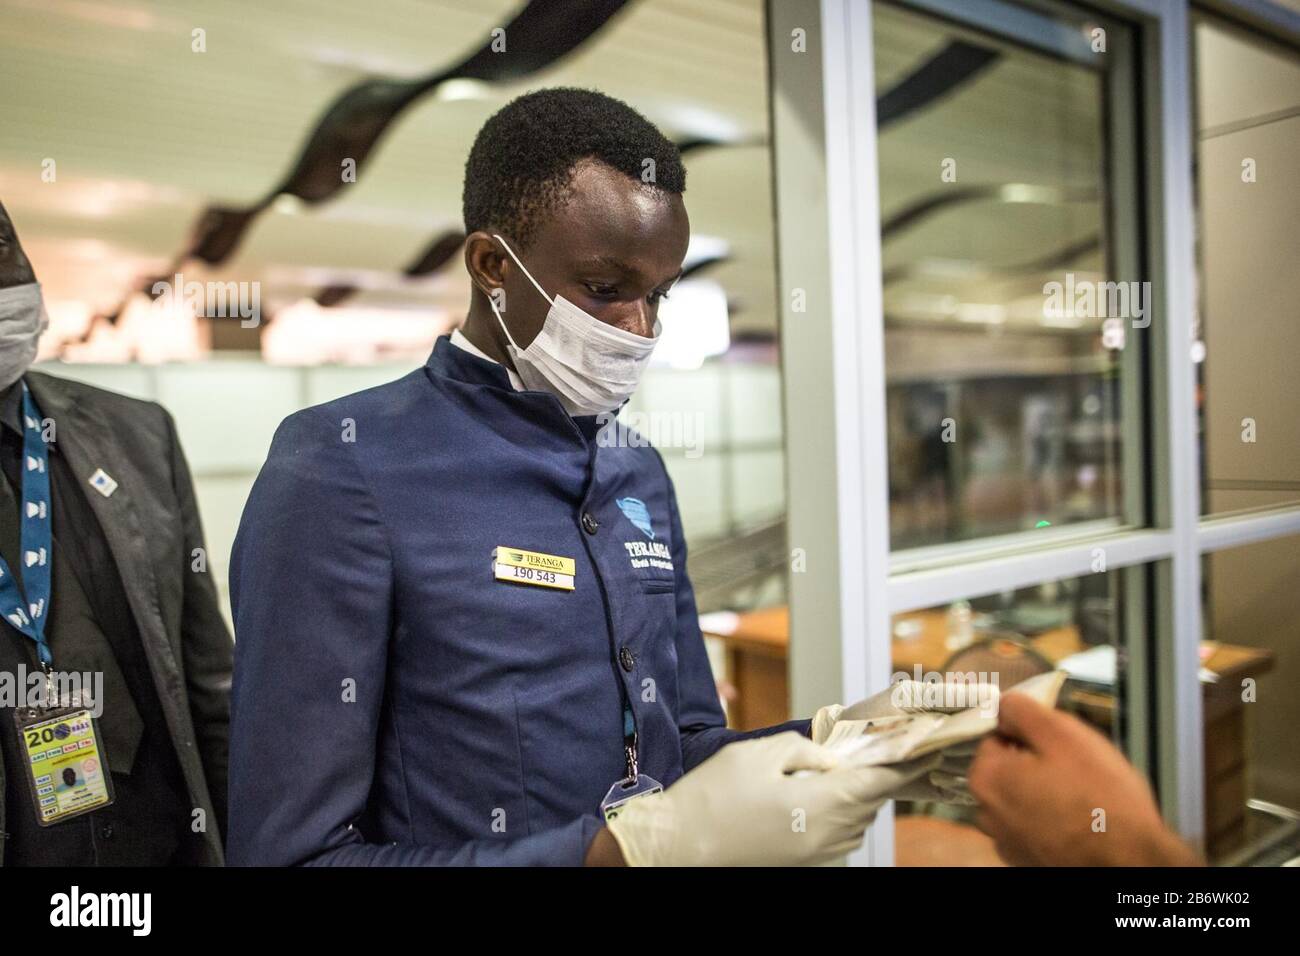 Dakar, Senegal. 10th Mar, 2020. An airport employee wearing face mask checks passports at the entrance of the airport, in Dakar, Senegal, March 10, 2020. Senegalese Ministry of Health and Social Action confirmed the country's fifth case of the COVID-19 on Wednesday. In order to prevent more cases from entering Senegal, the authorities of Blaise Diagne International Airport, under the guideline of Senegalese Ministry of Health and Social Action, have intensified all the necessary measures to detect cases of the novel coronavirus. Credit: Eddy Peters/Xinhua/Alamy Live News Stock Photo